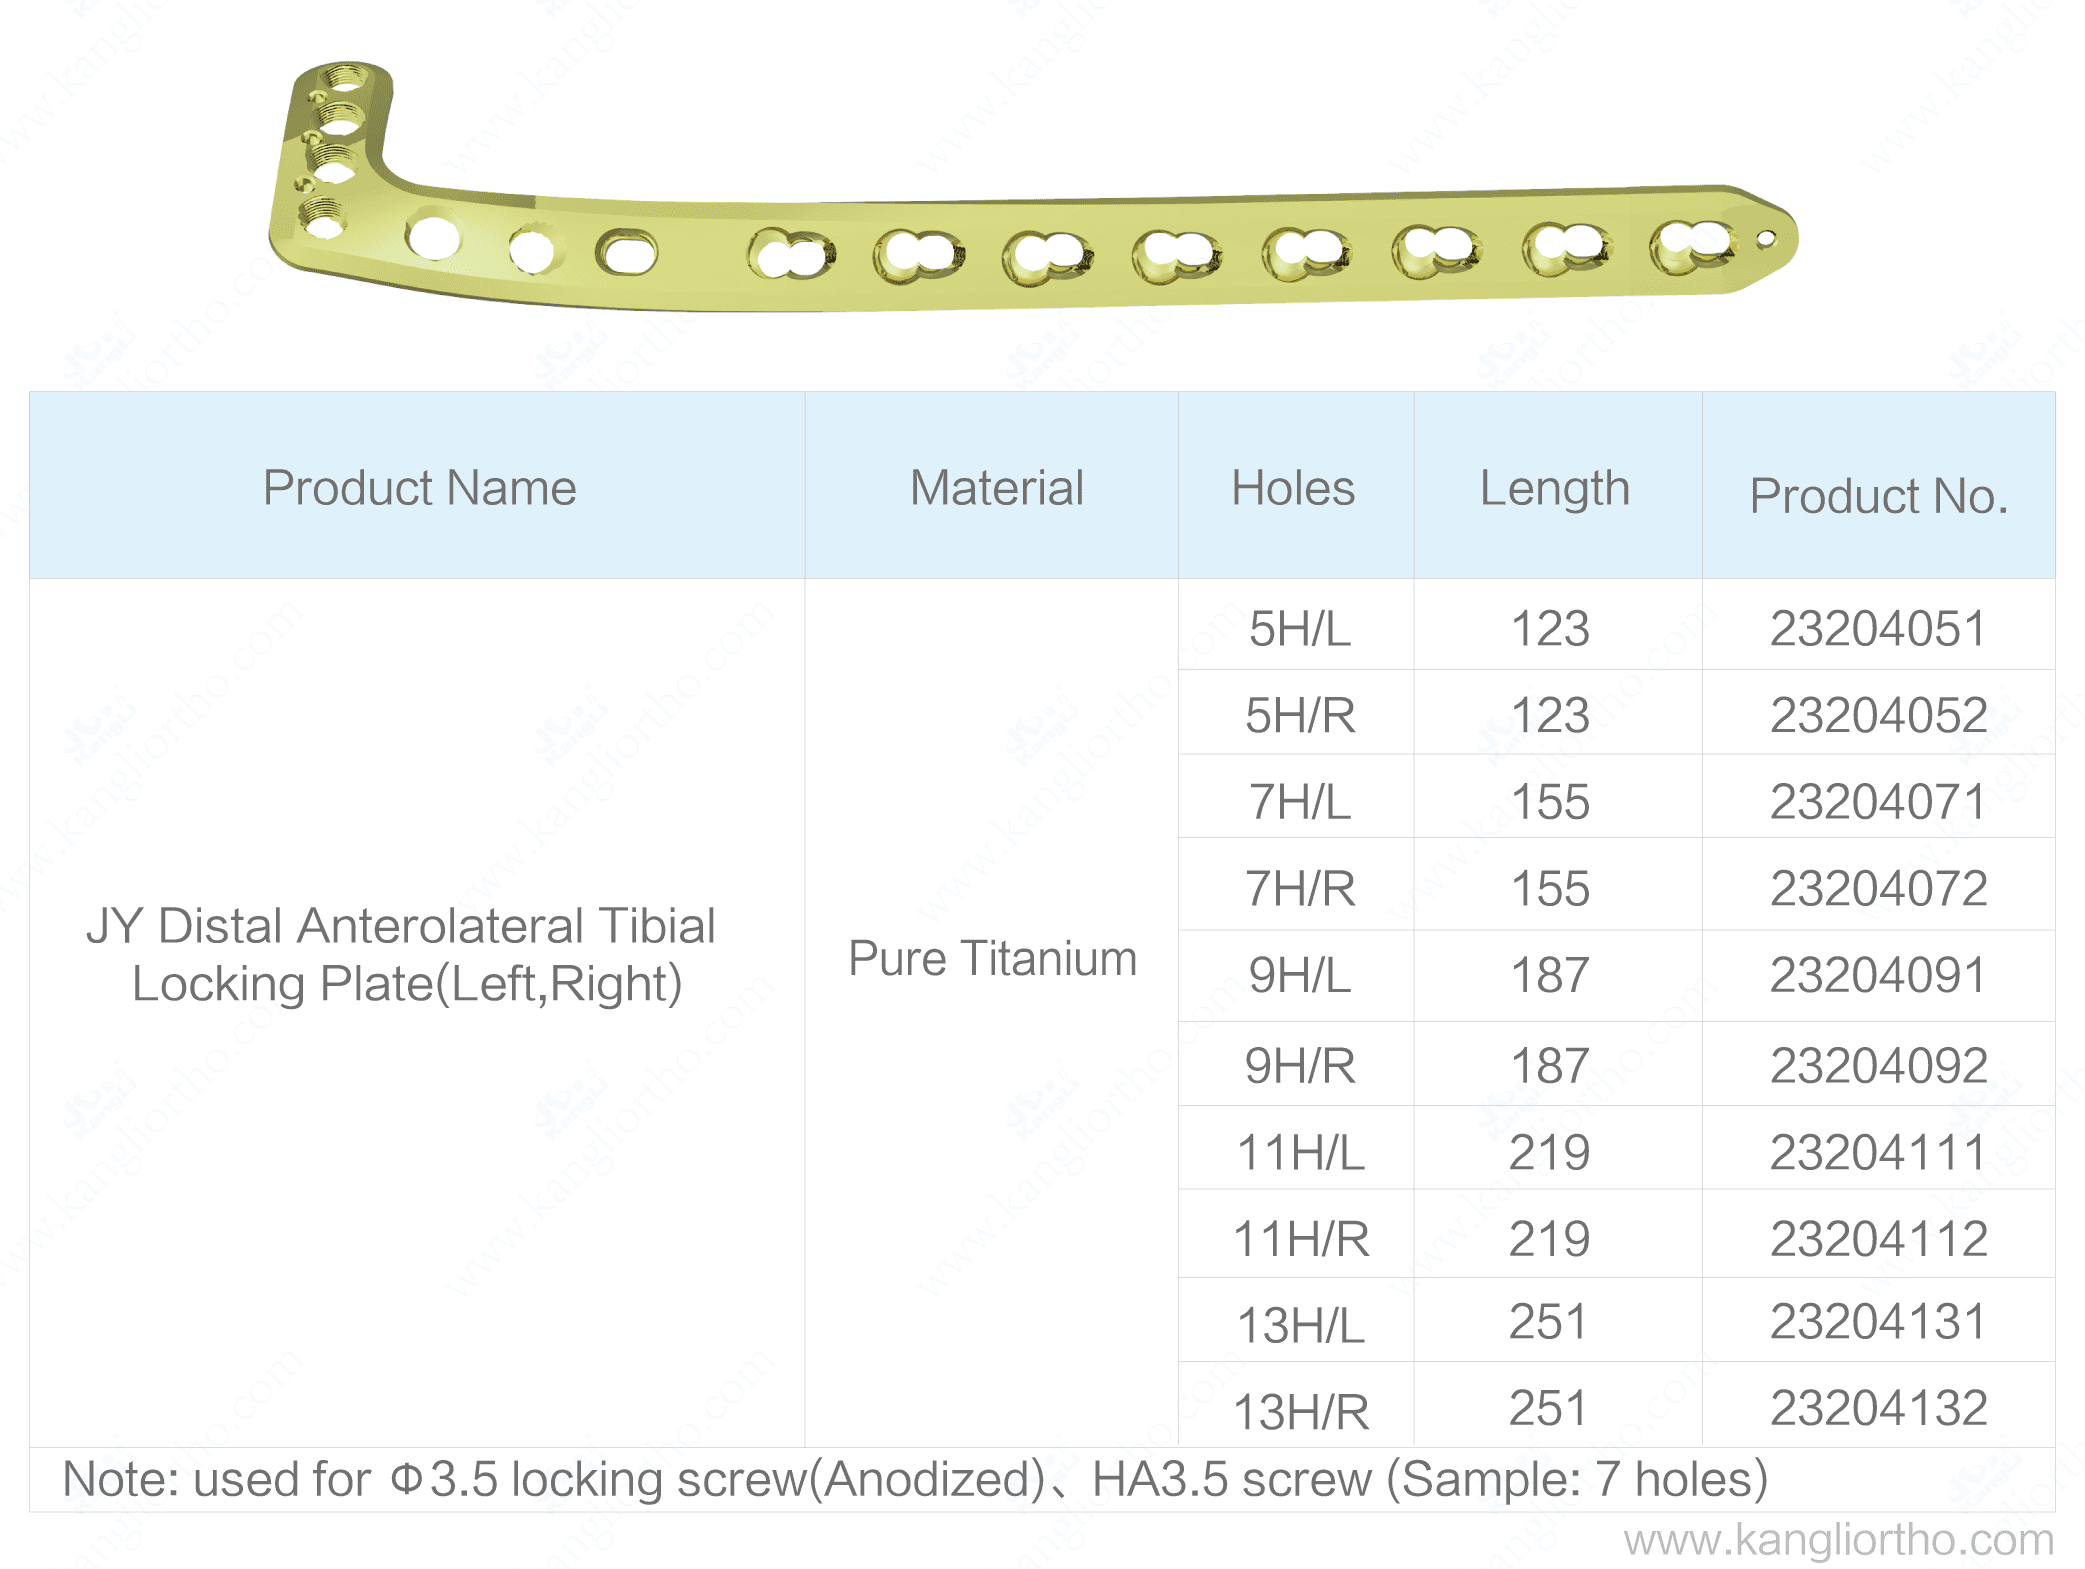 jy-distal-anterolateral-tibial-locking-plate-specifications